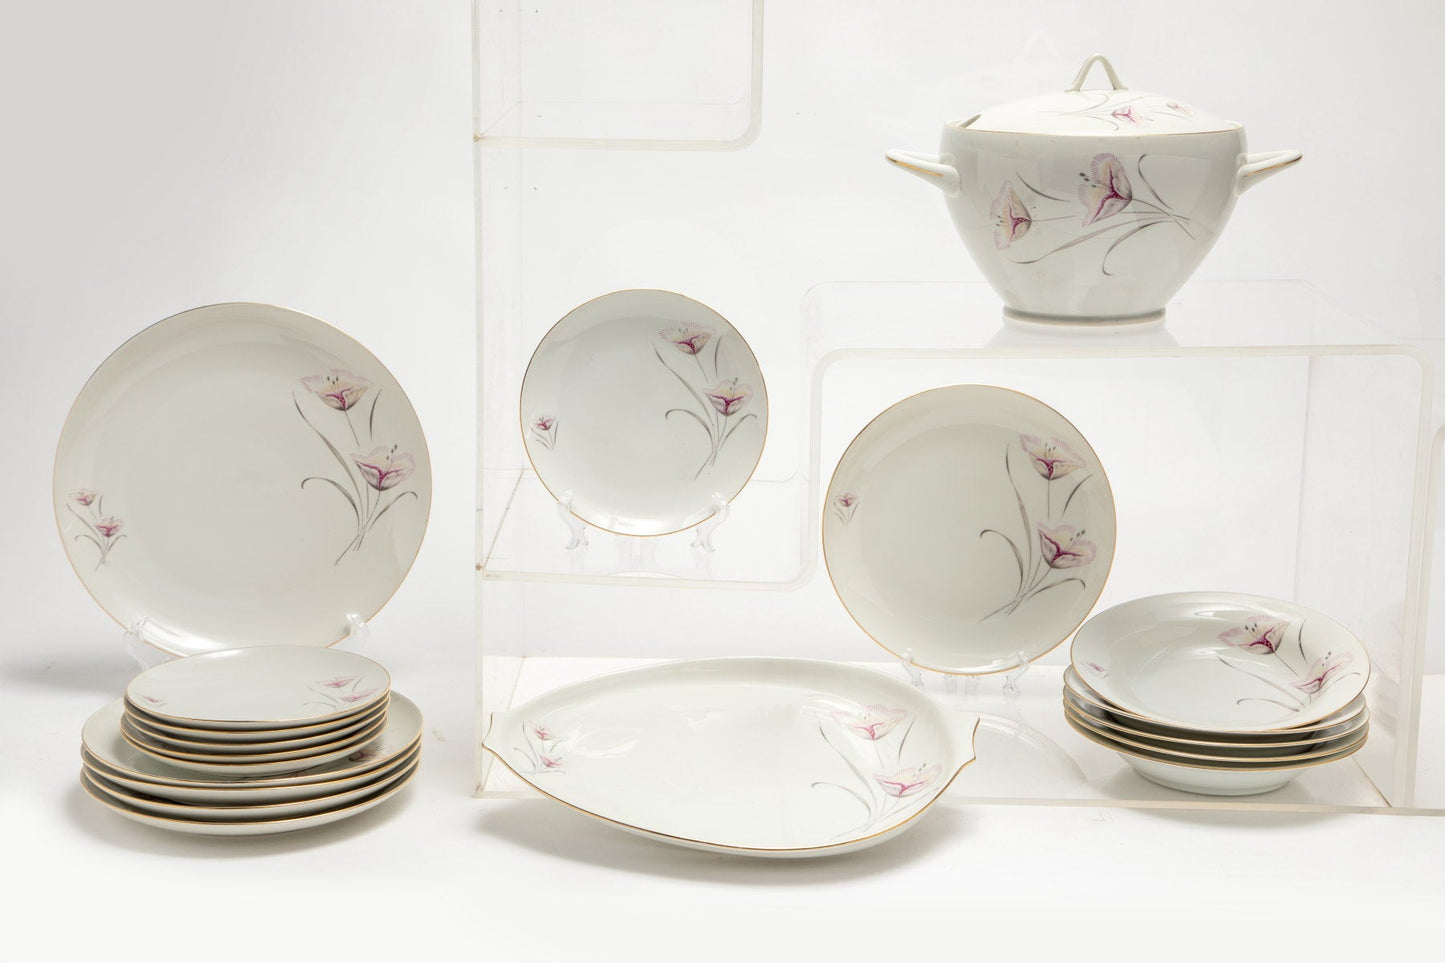 Decorated porcelain dinner service from the 50s